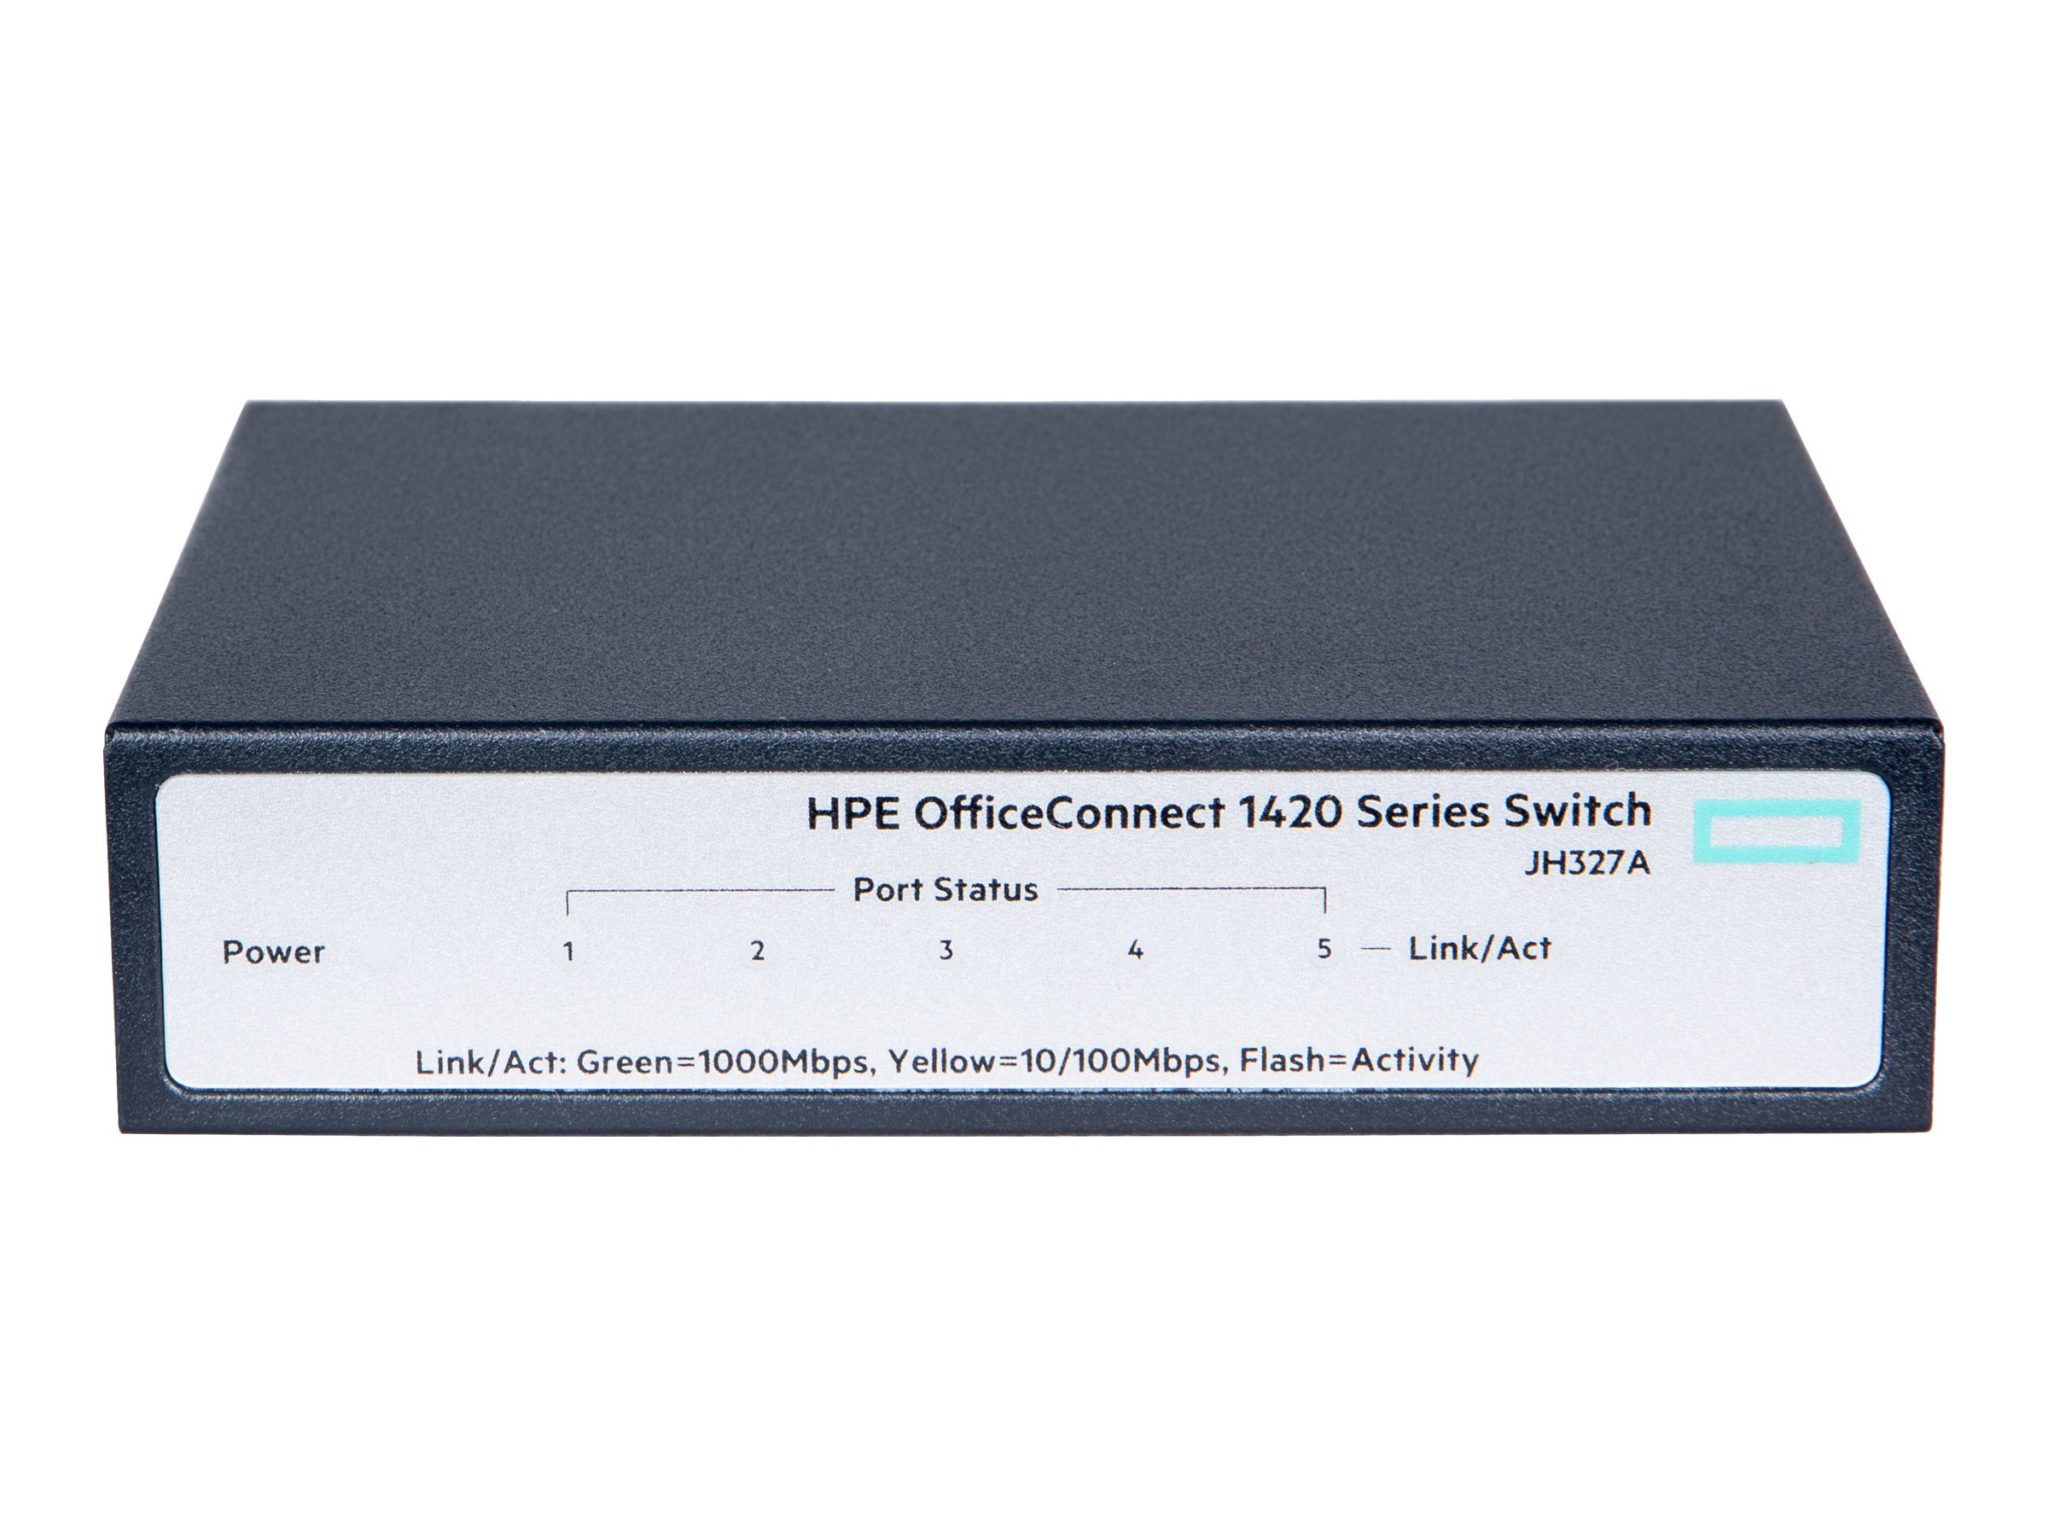 HPE OfficeConnect 1420 5G 5 Port Switch